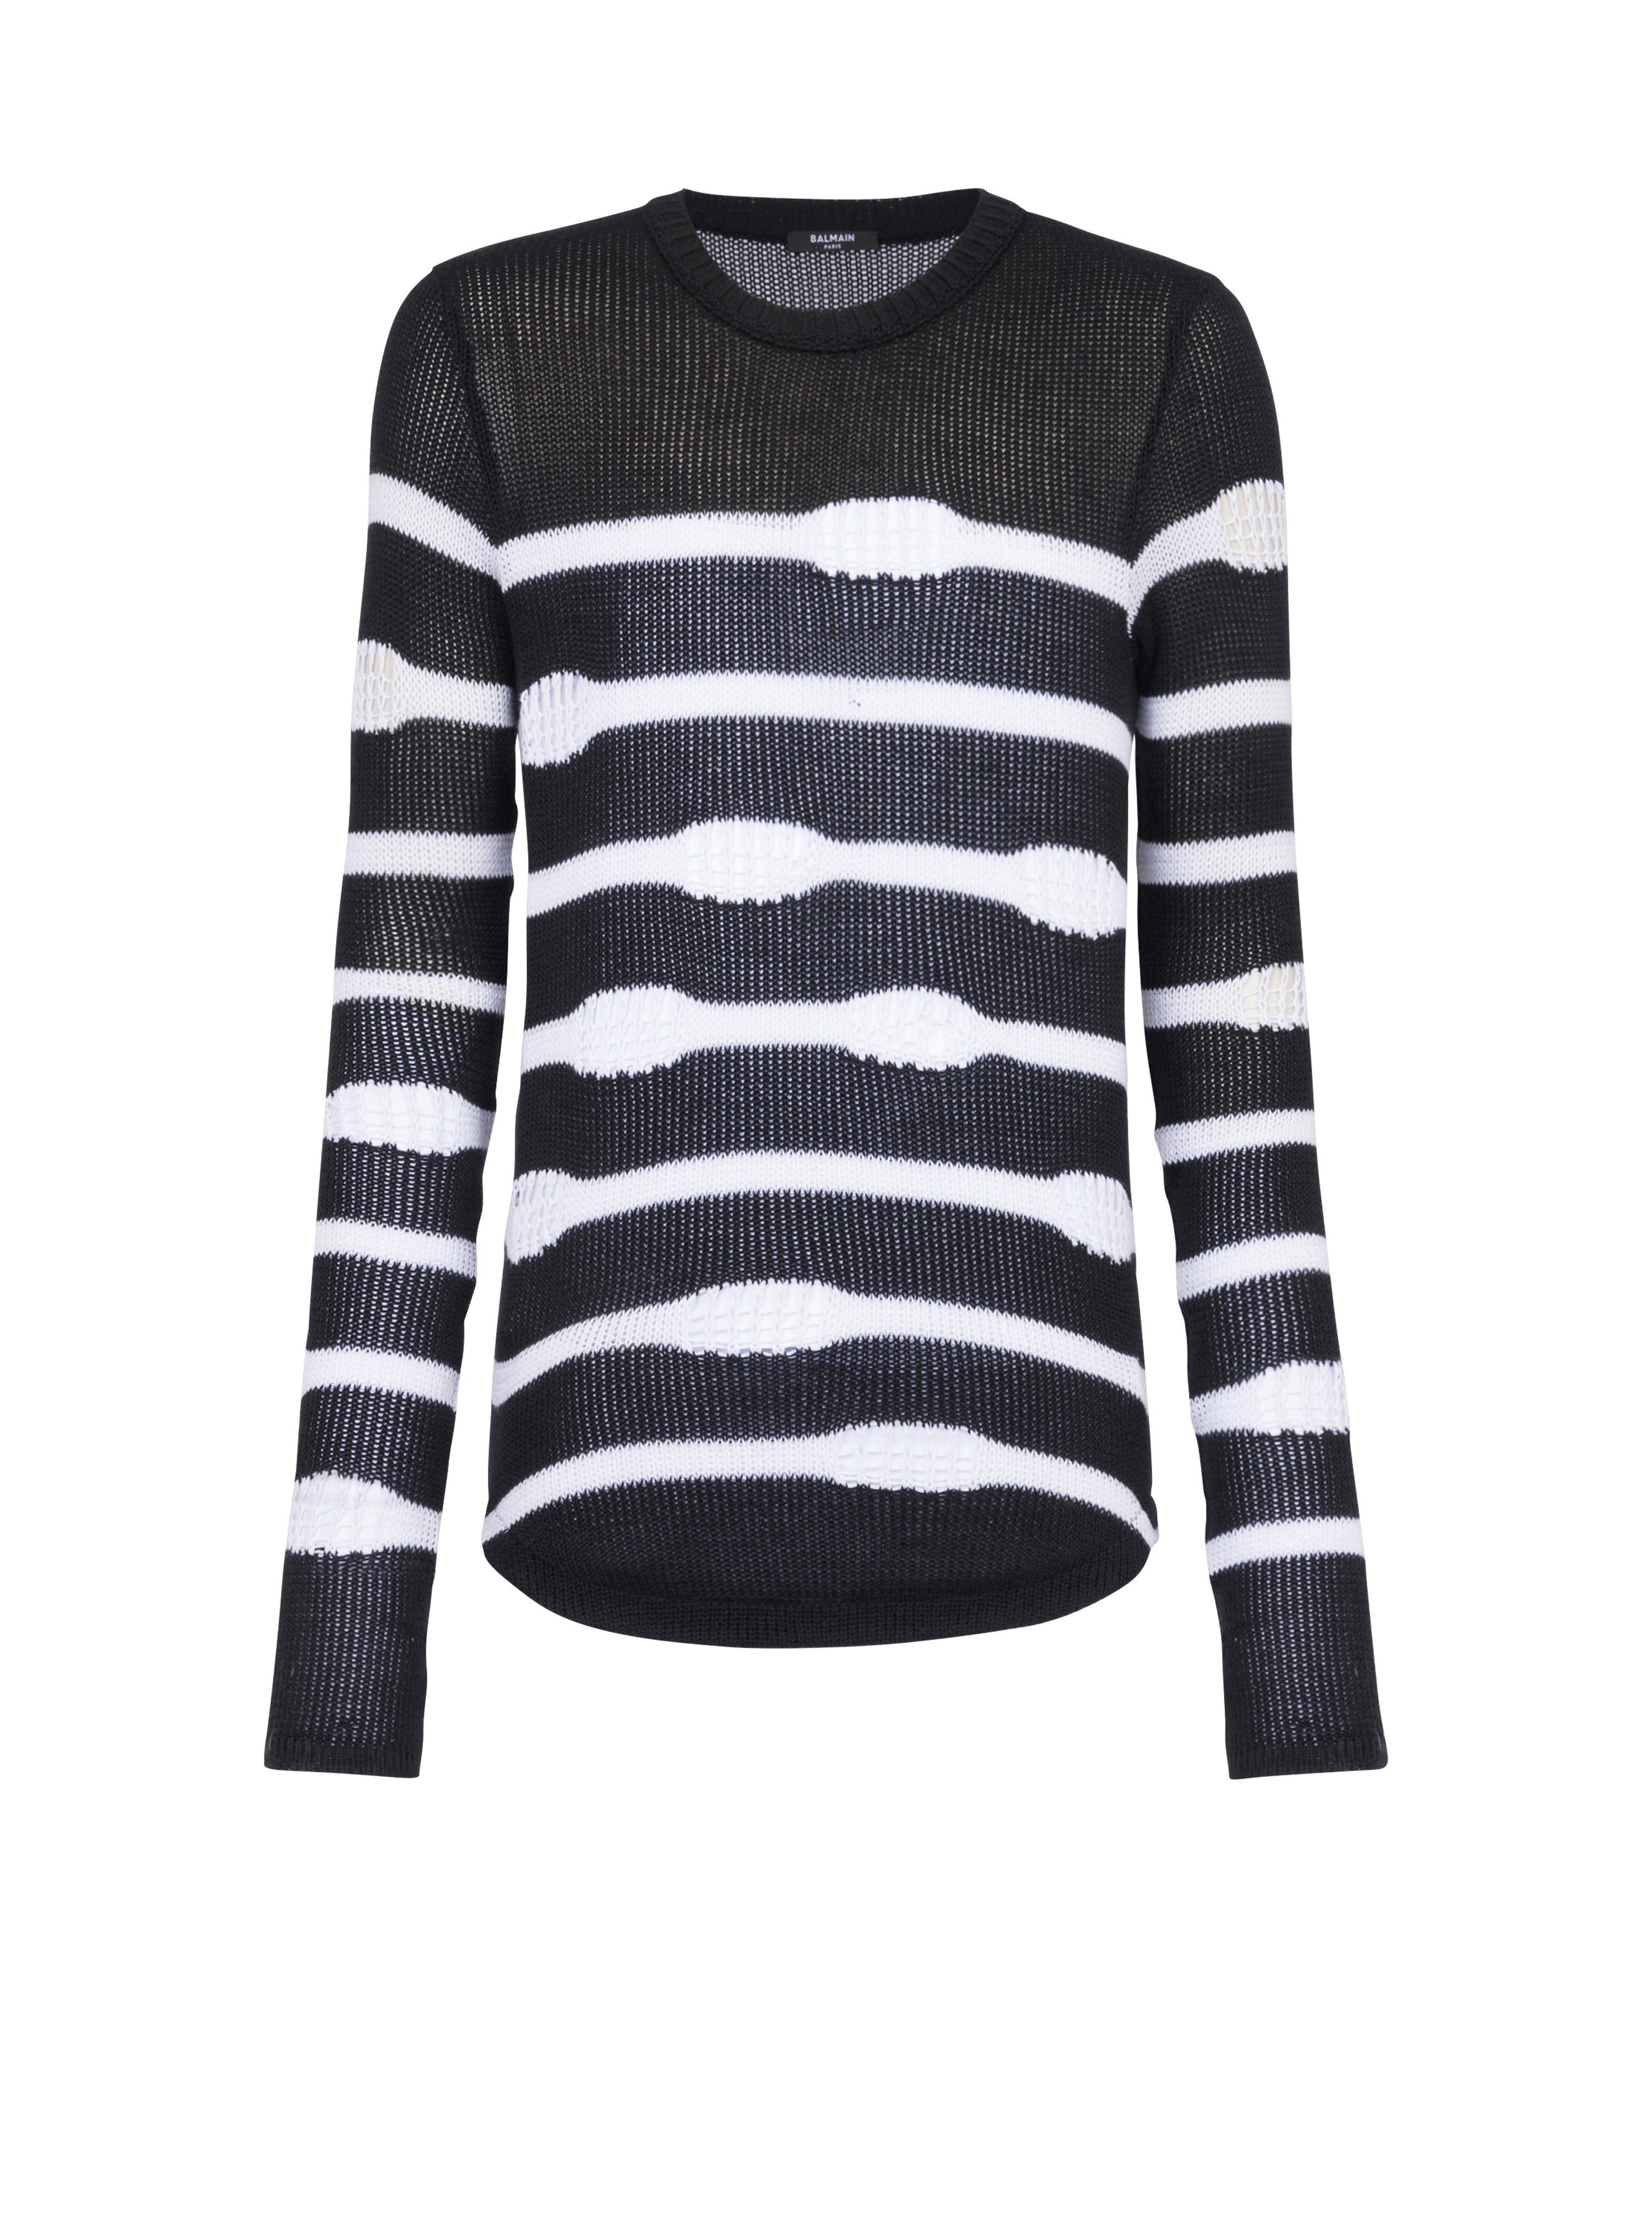 Destroyed striped nautical sweater, black